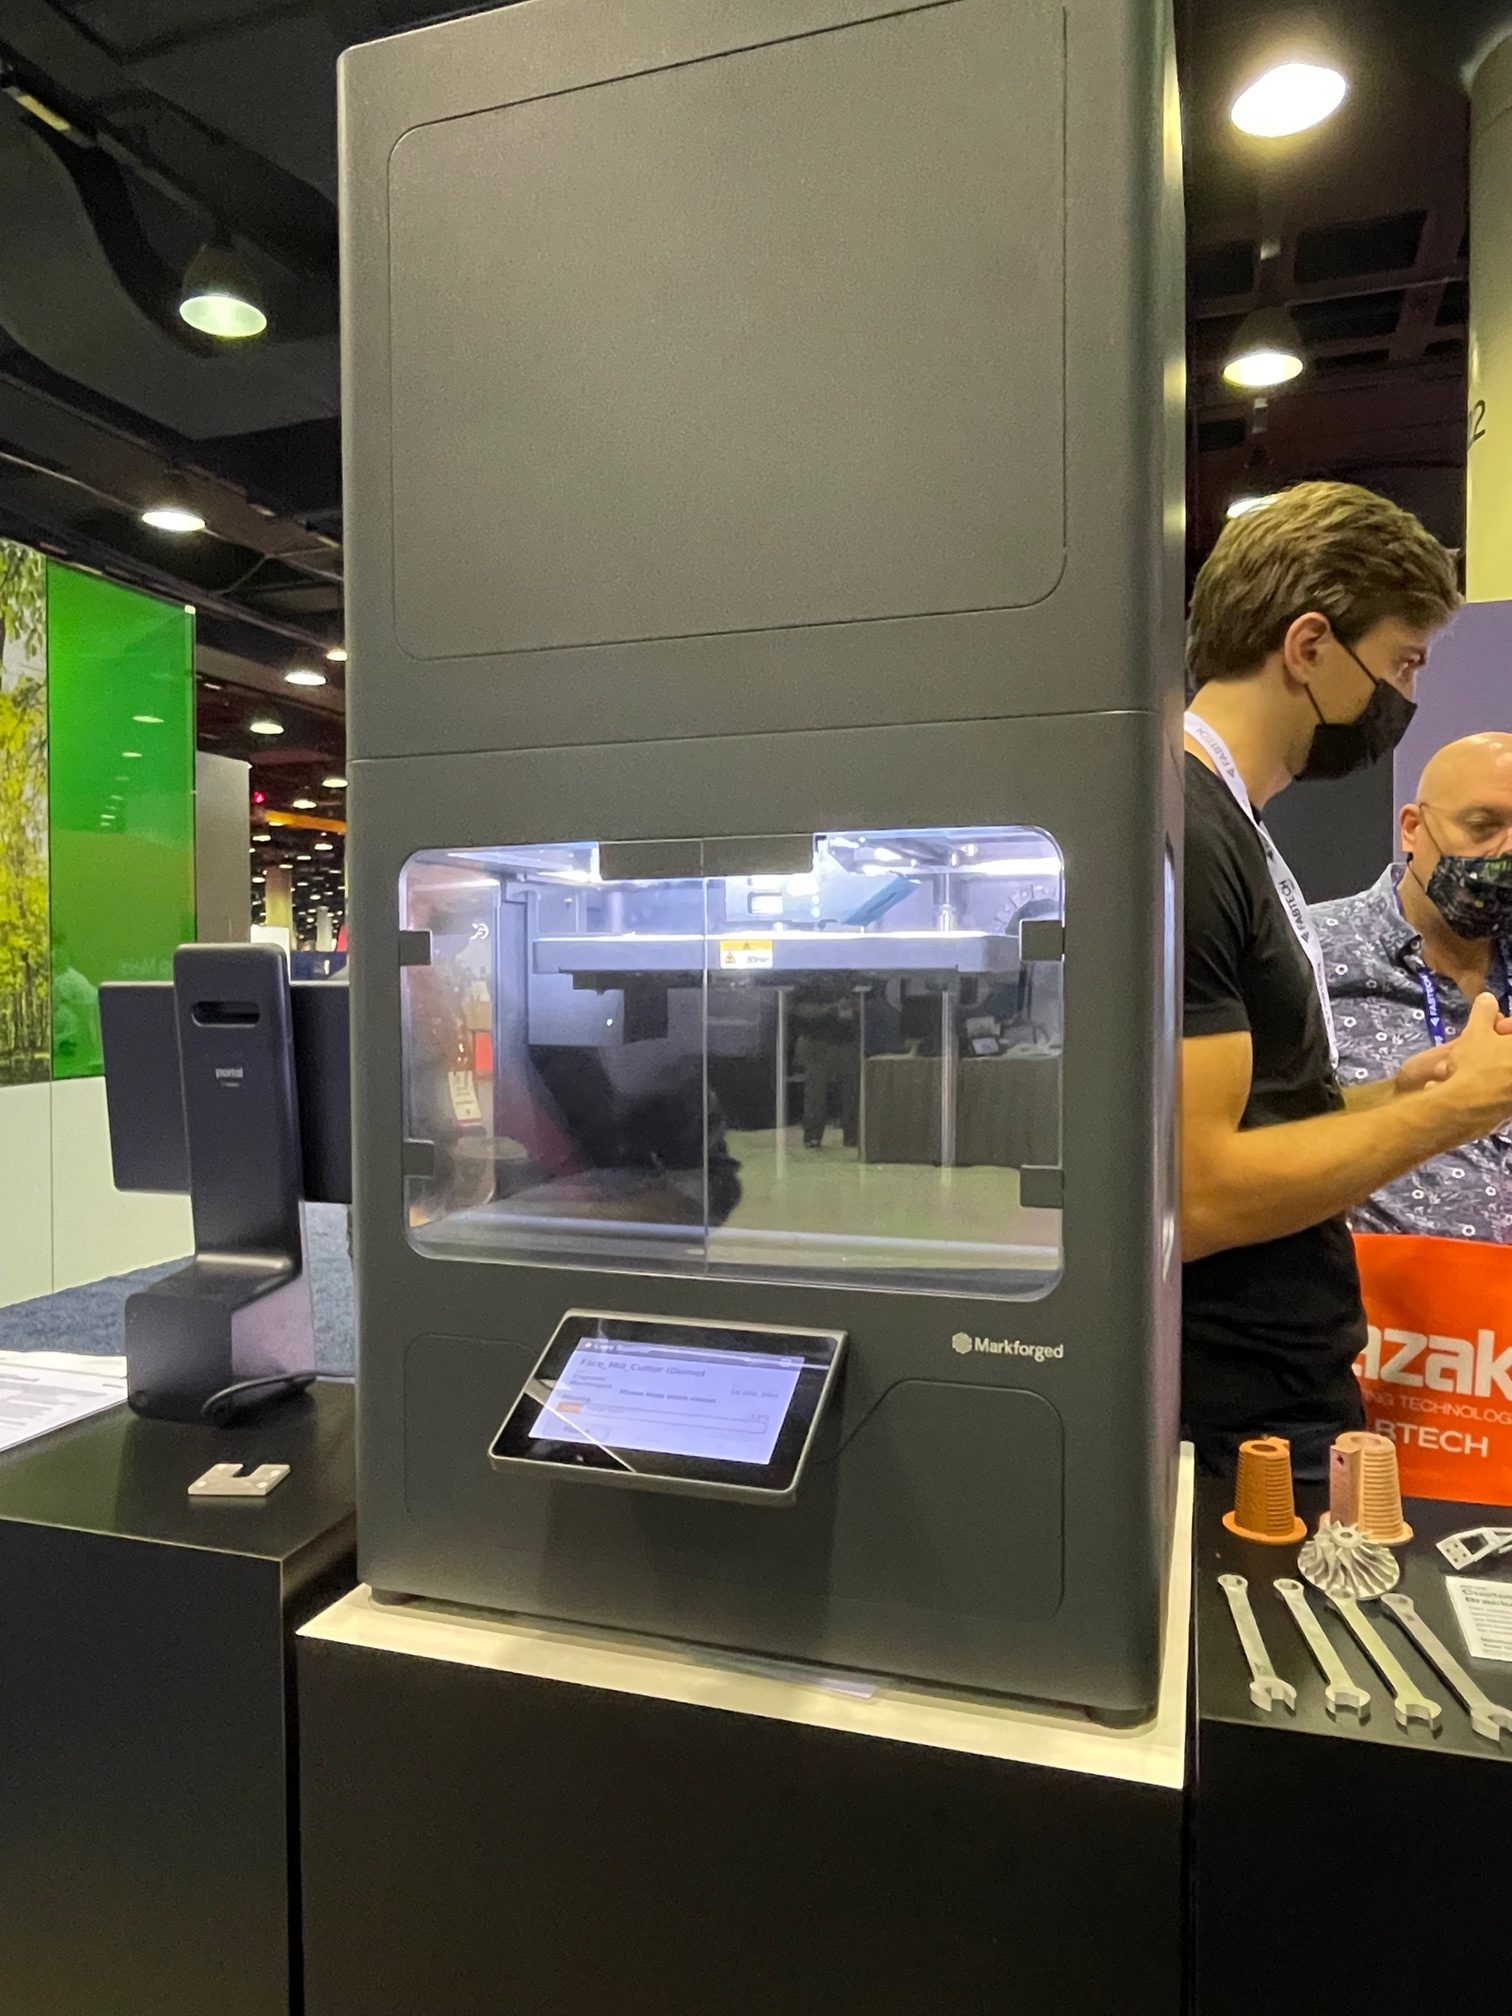 Markforged booth at the RAPID + TCT 2021 in Chicago.